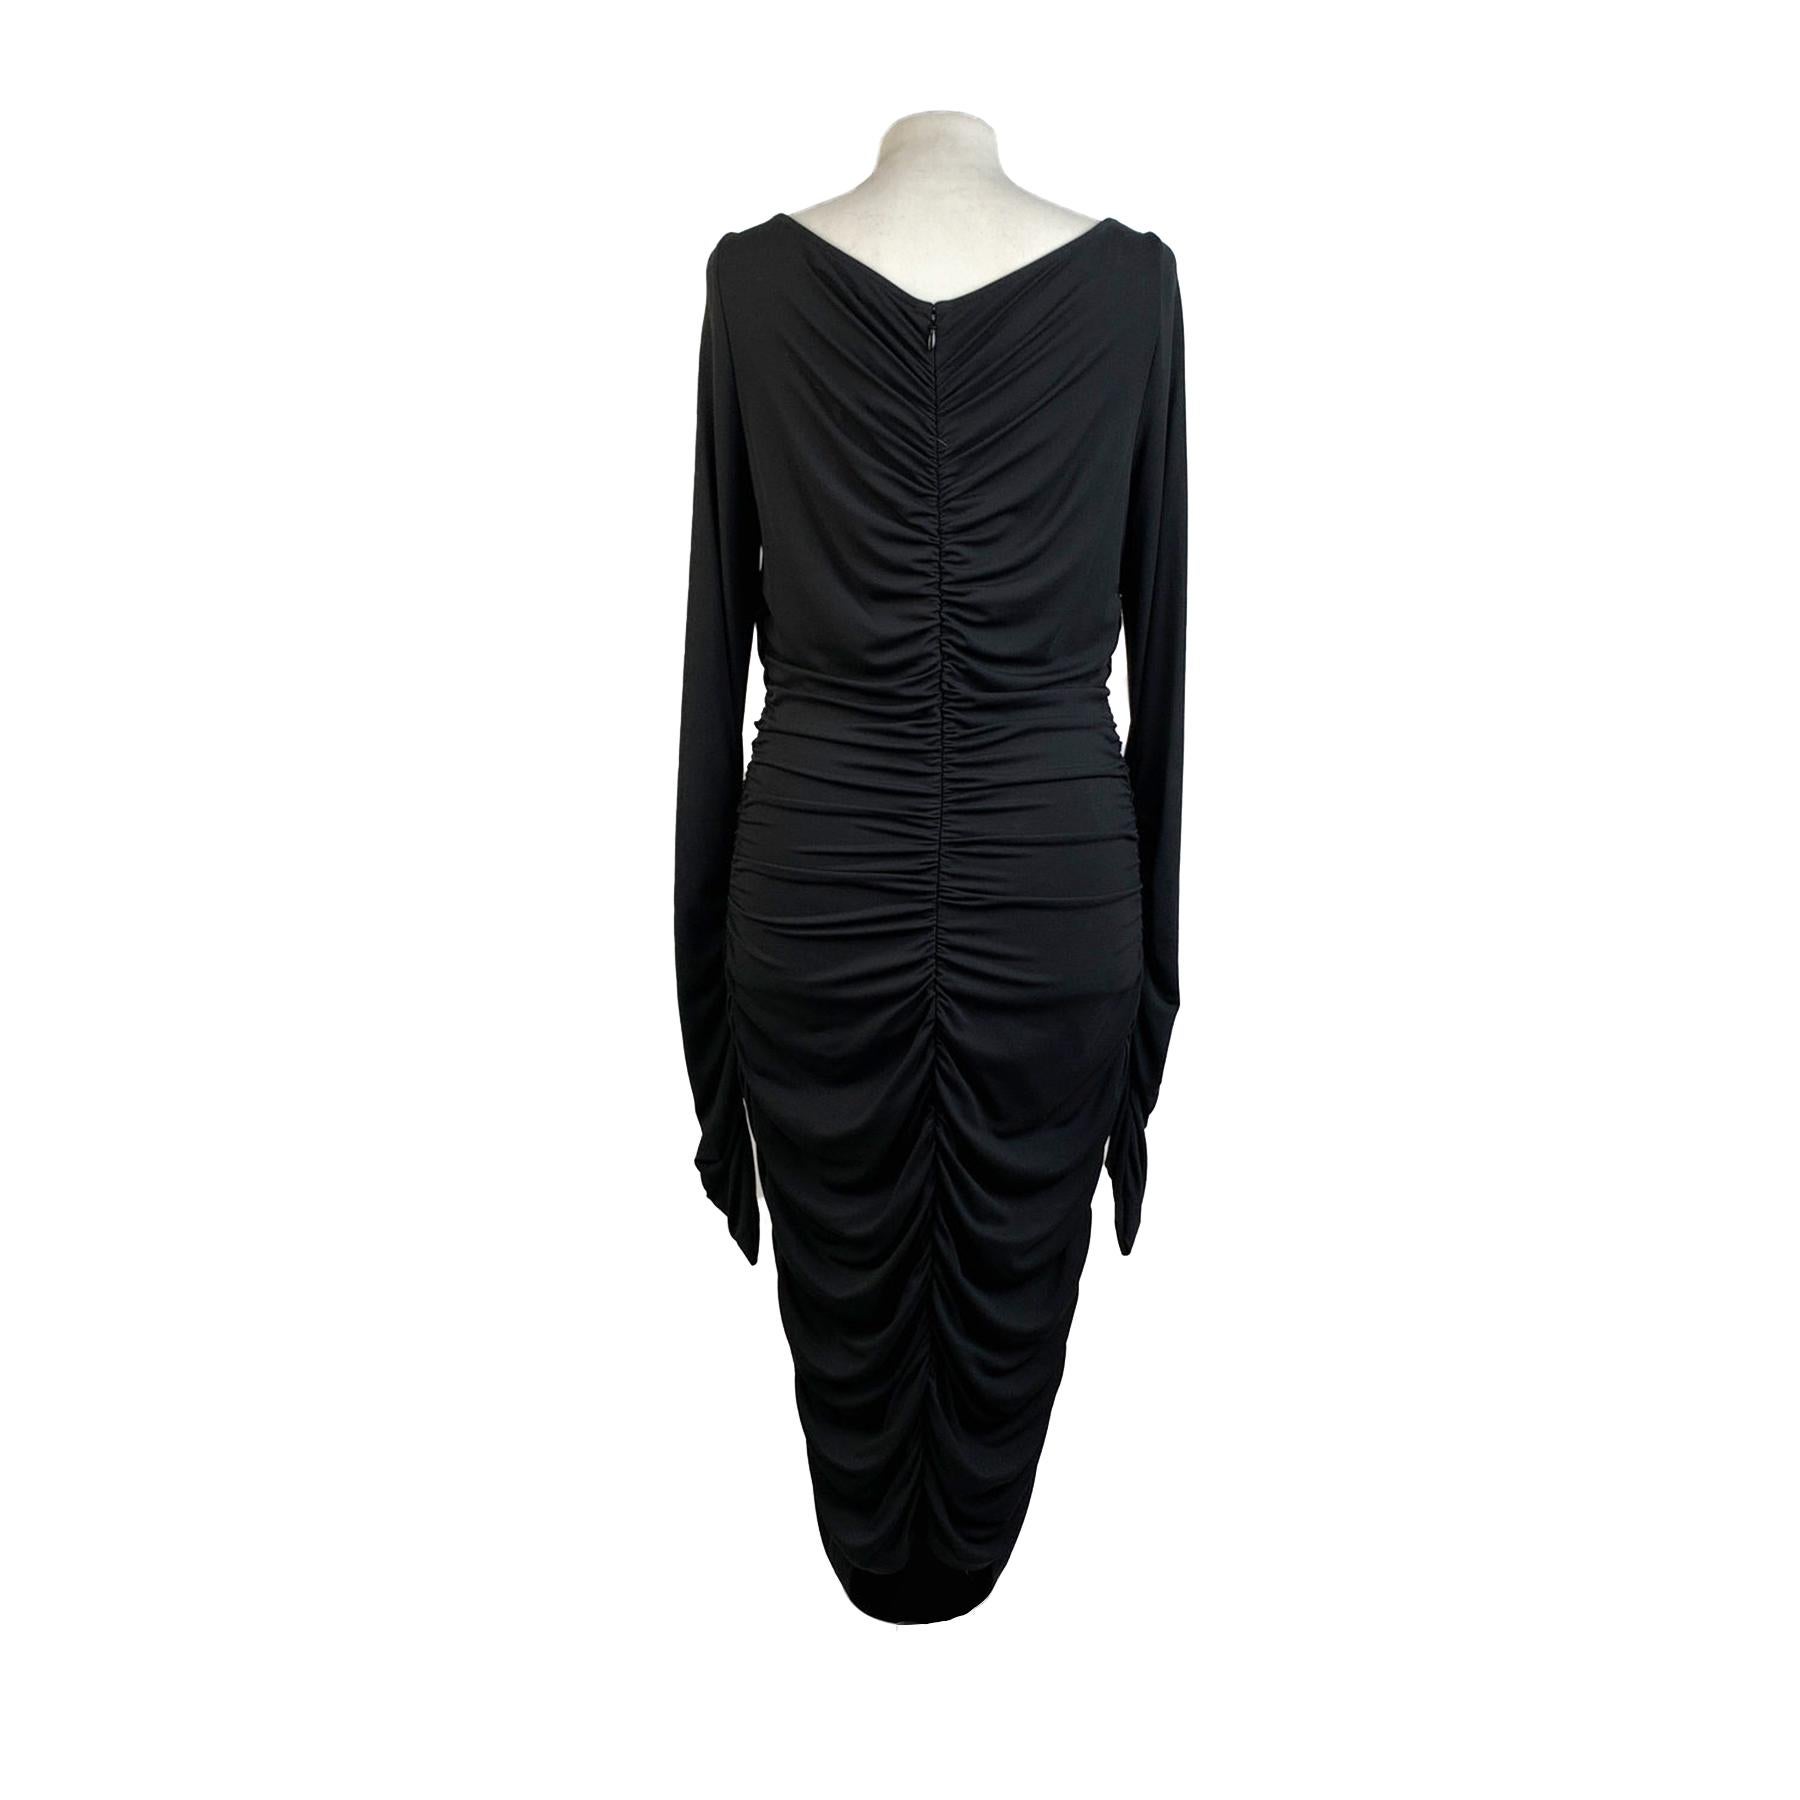 Blumarine Long Sleeve Dress with ruched sides. Crafted in black stretch jersey fabric. It features cut-out detailing on the shoulder, boat neckline and a rear zip closure. Unlined. Composition: 95% rayon, 5% elastan. Size: 44 IT, 38 D (it should